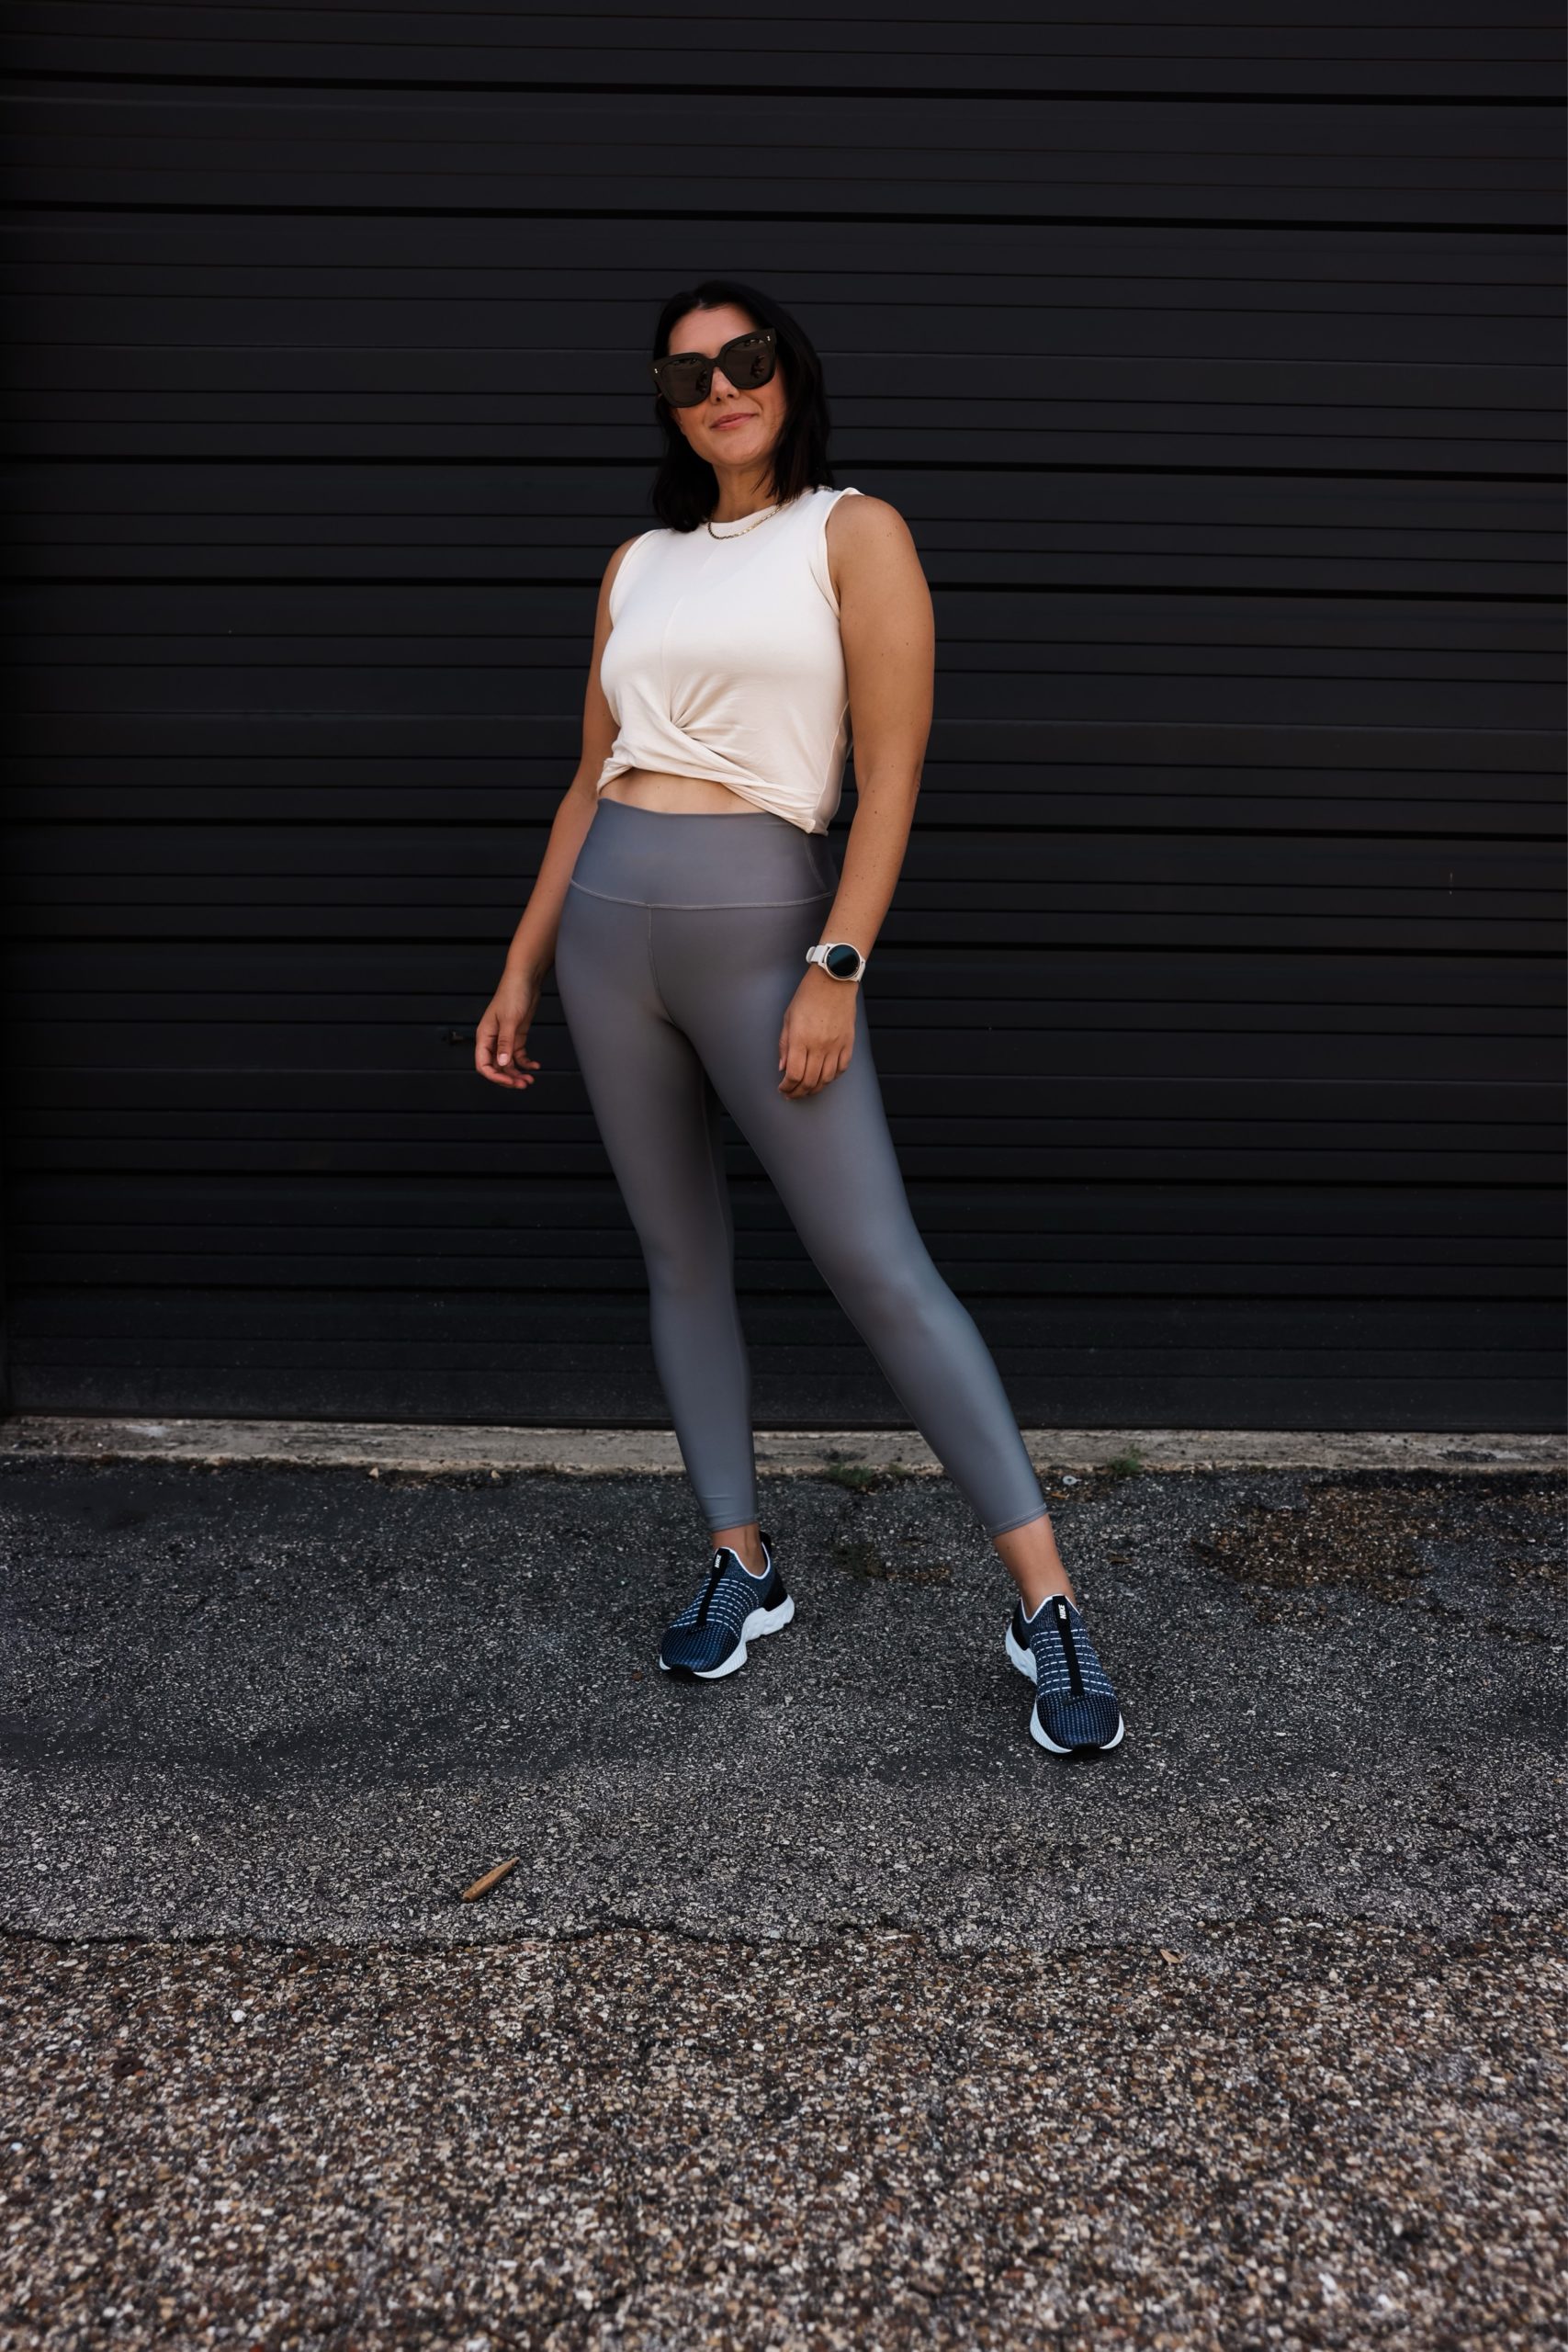 Kendi Everyday wearing Alo Airlift Leggings outfit 02